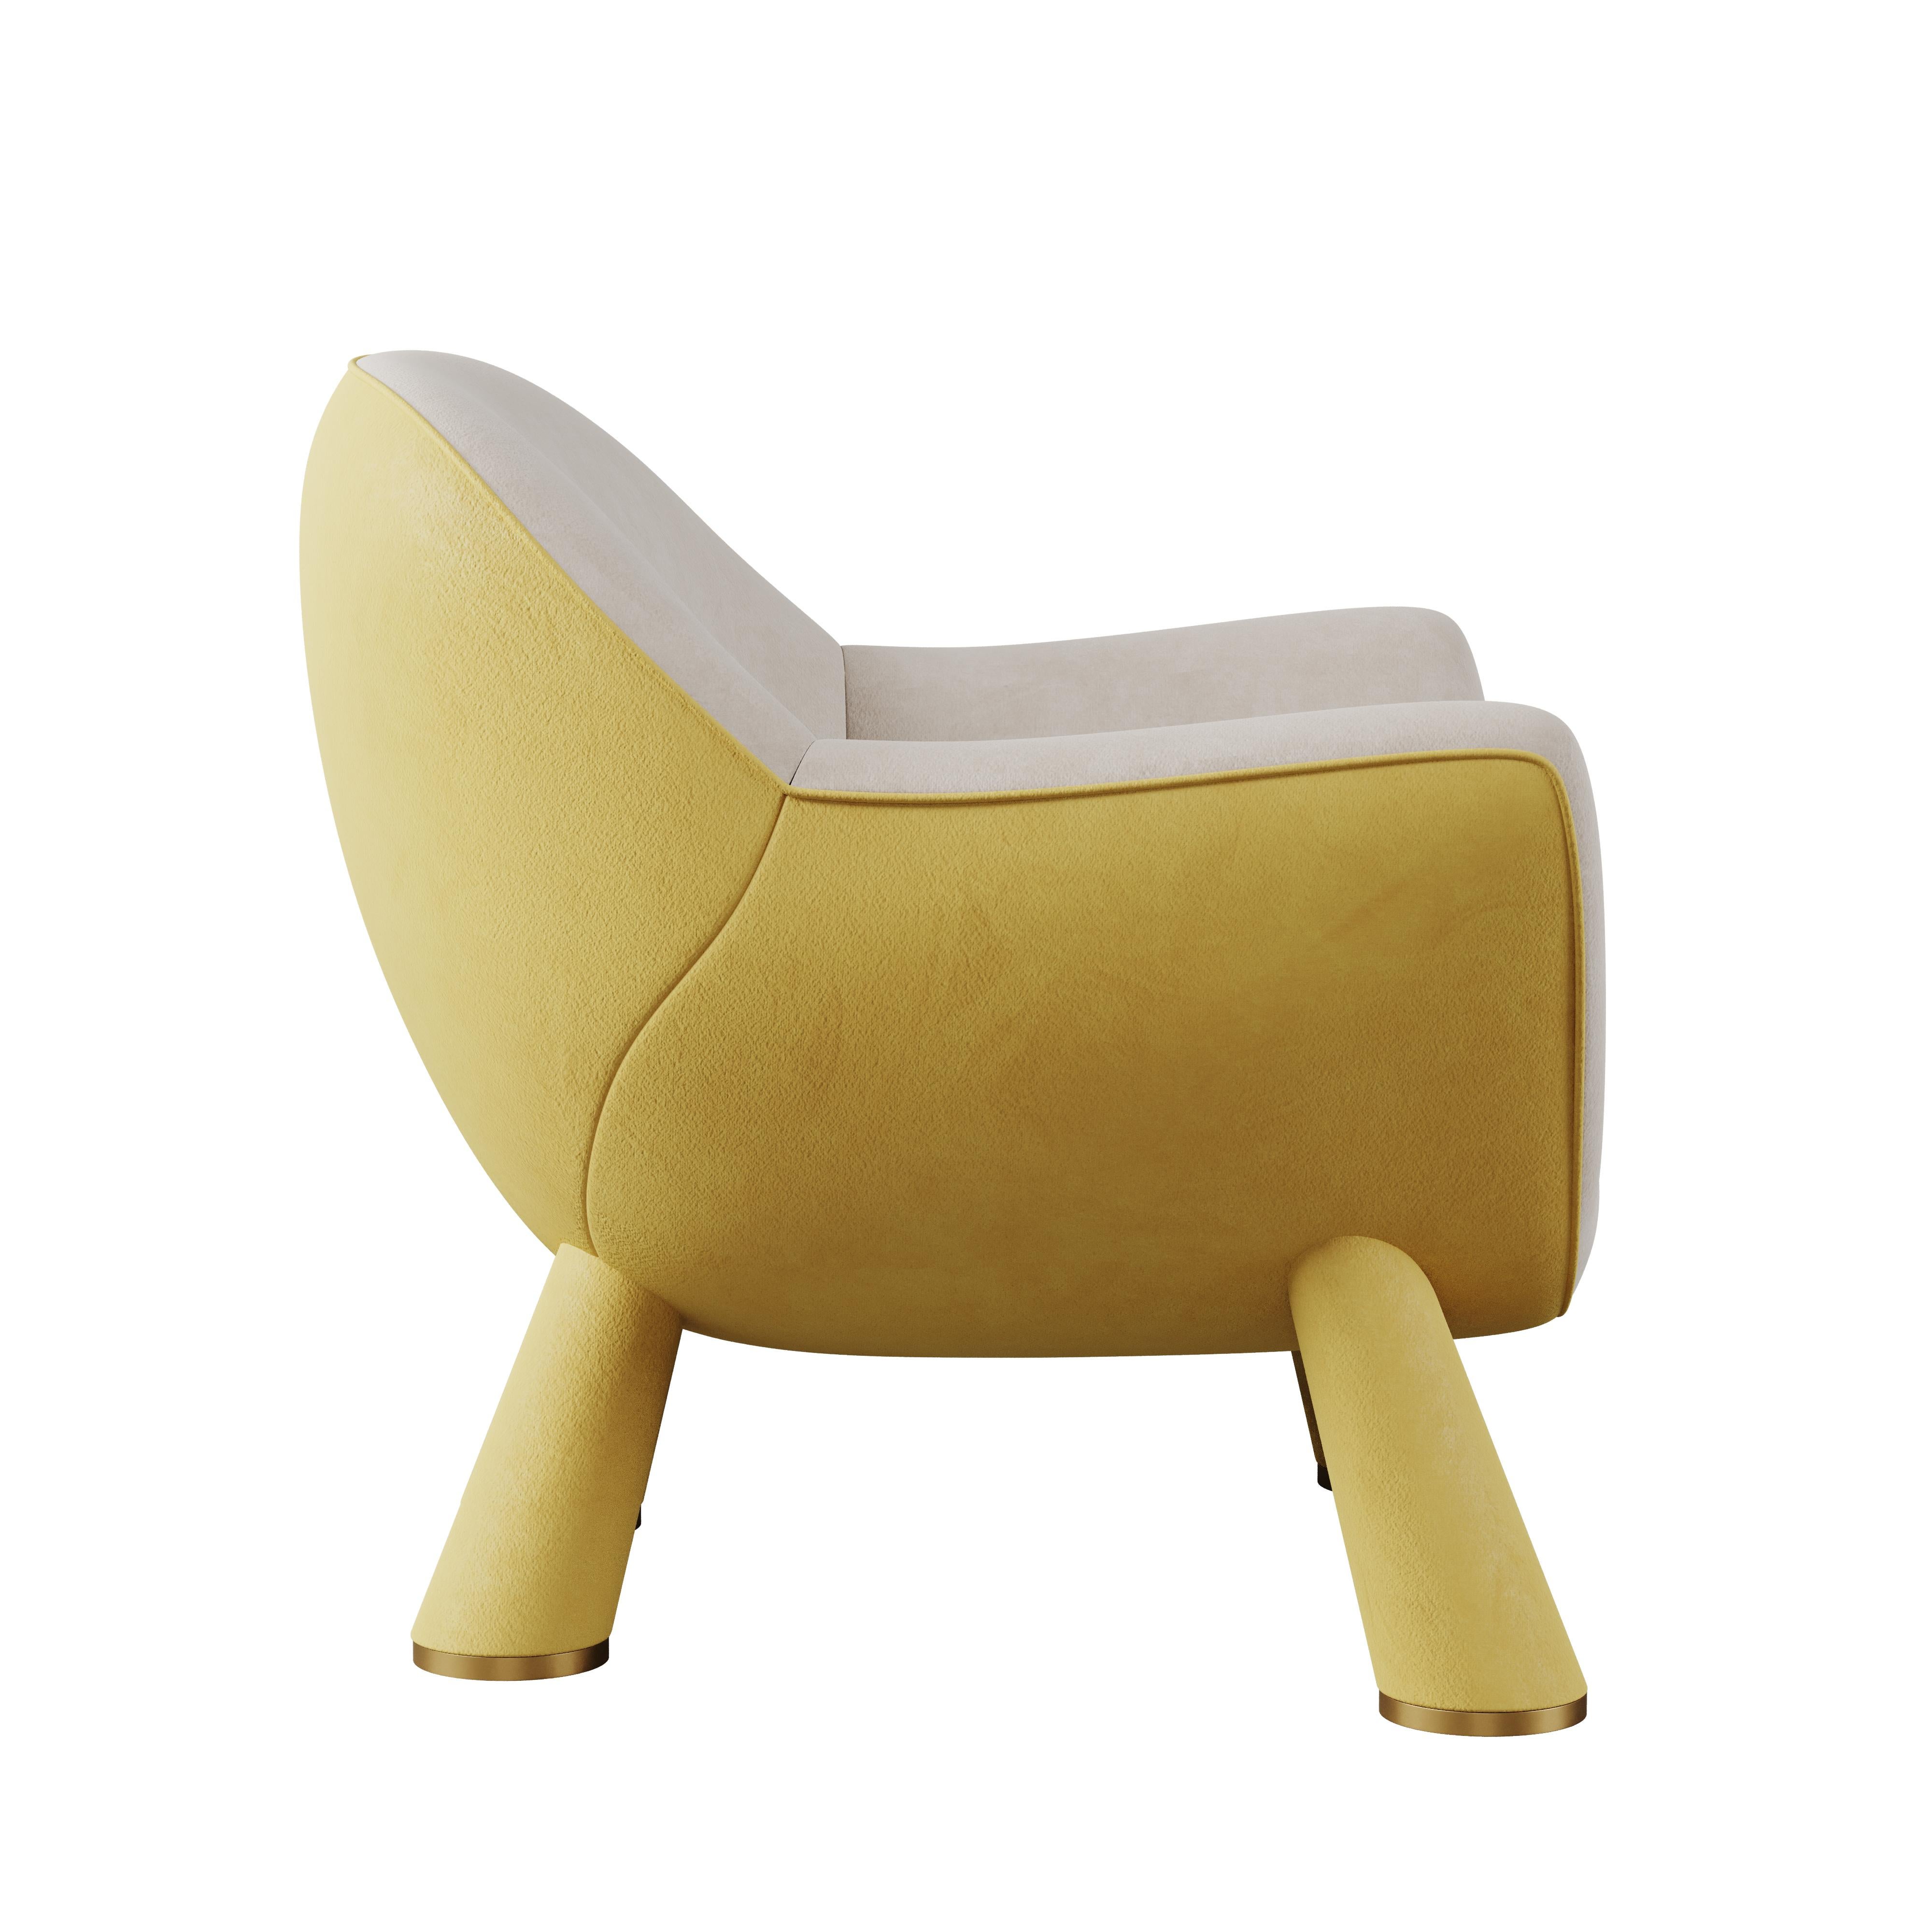 Contemporary Mid-Century Modern Lucy Armchair Walnut Wood Polished Brass Cotton Velvet For Sale